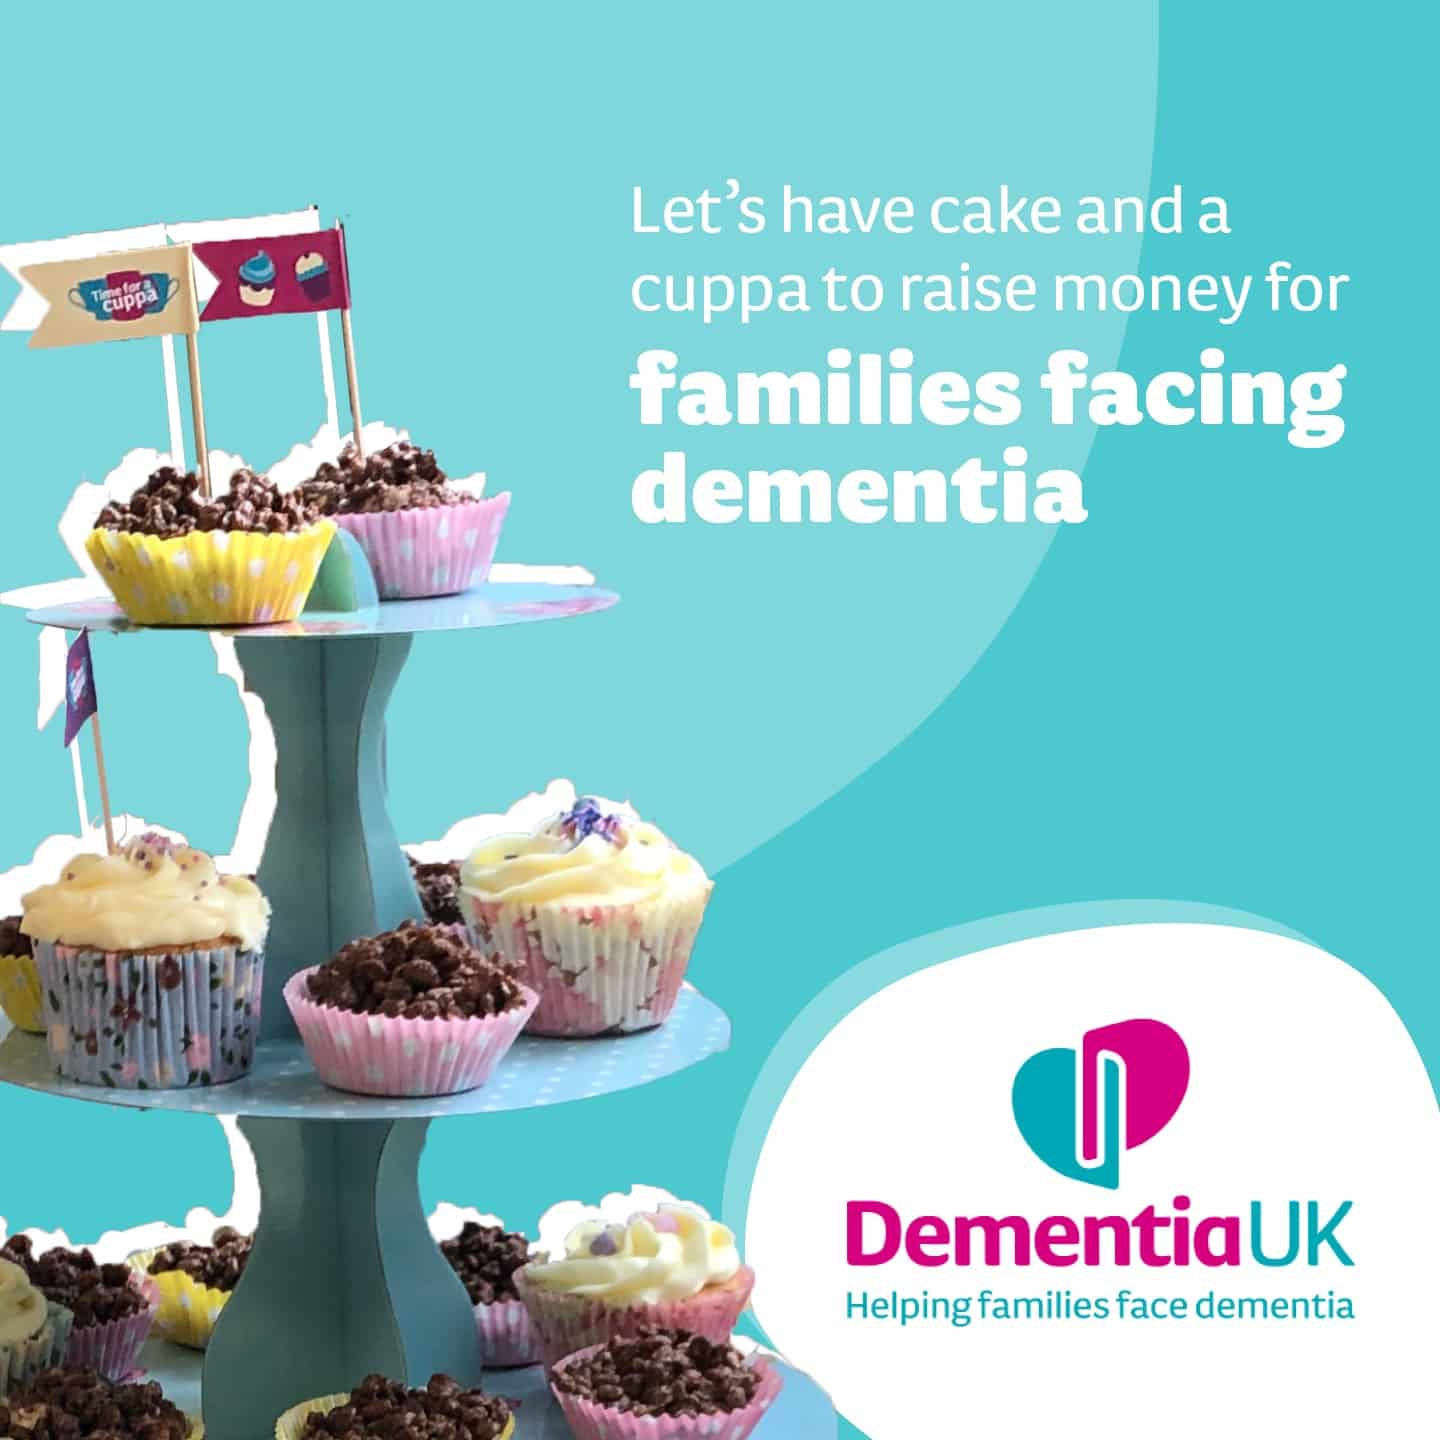 https://stratus.campaign-image.eu/images/32883000015497739_zc_v1_1712065944267_dementia_uk_time_for_a_cuppa.jpg